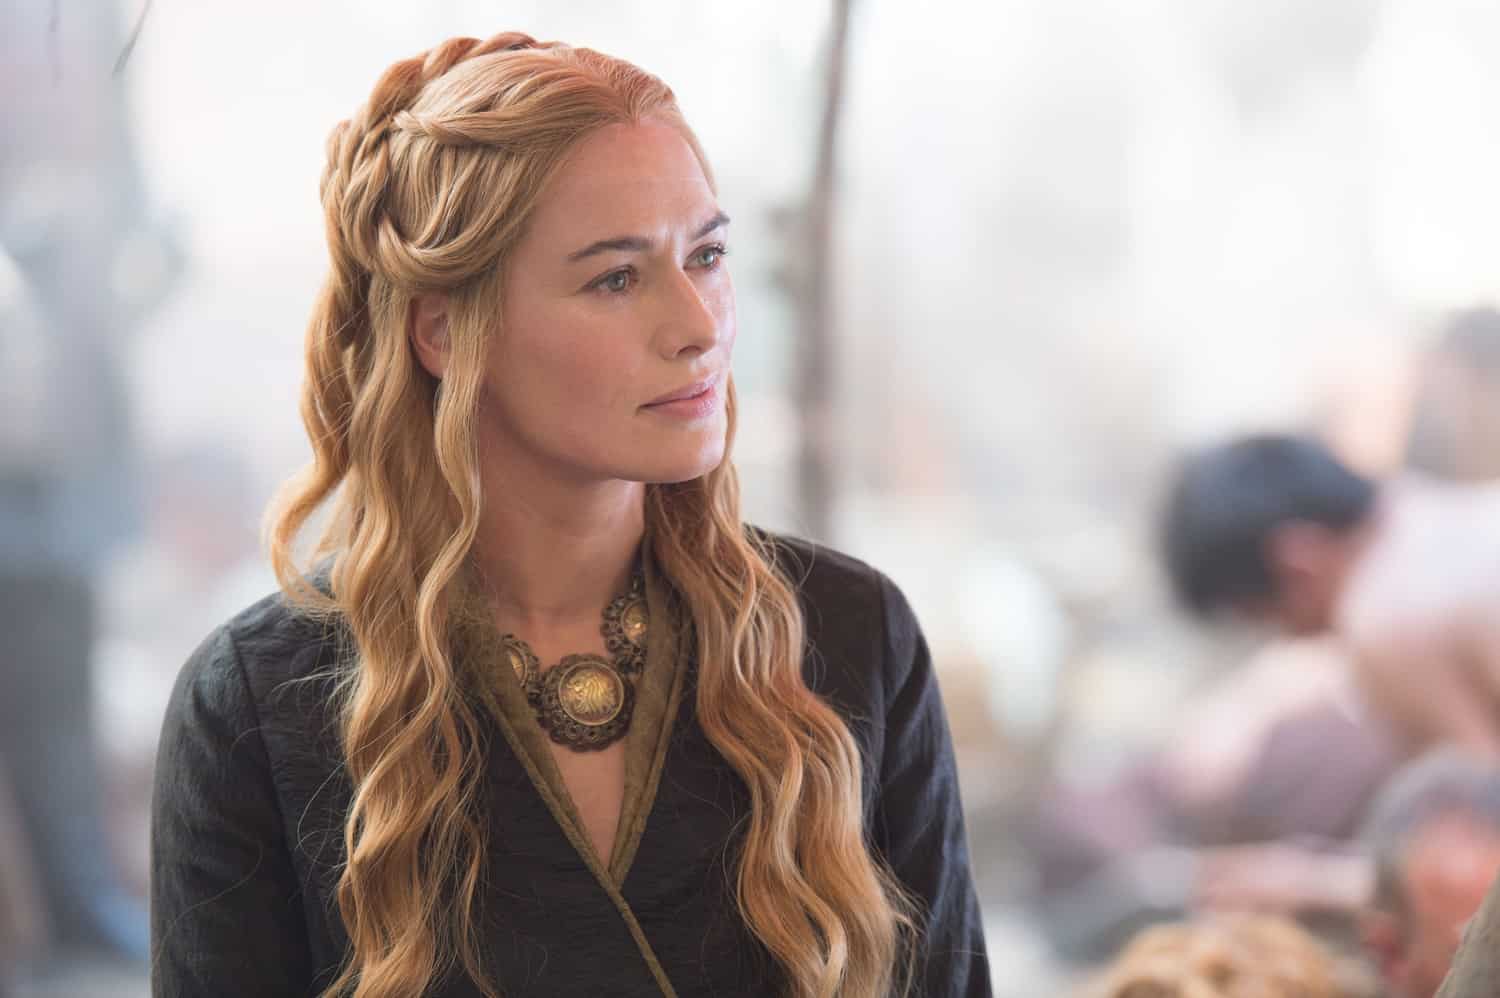 A woman with an ornate hairdo and jewels around her throat in this image from HBO